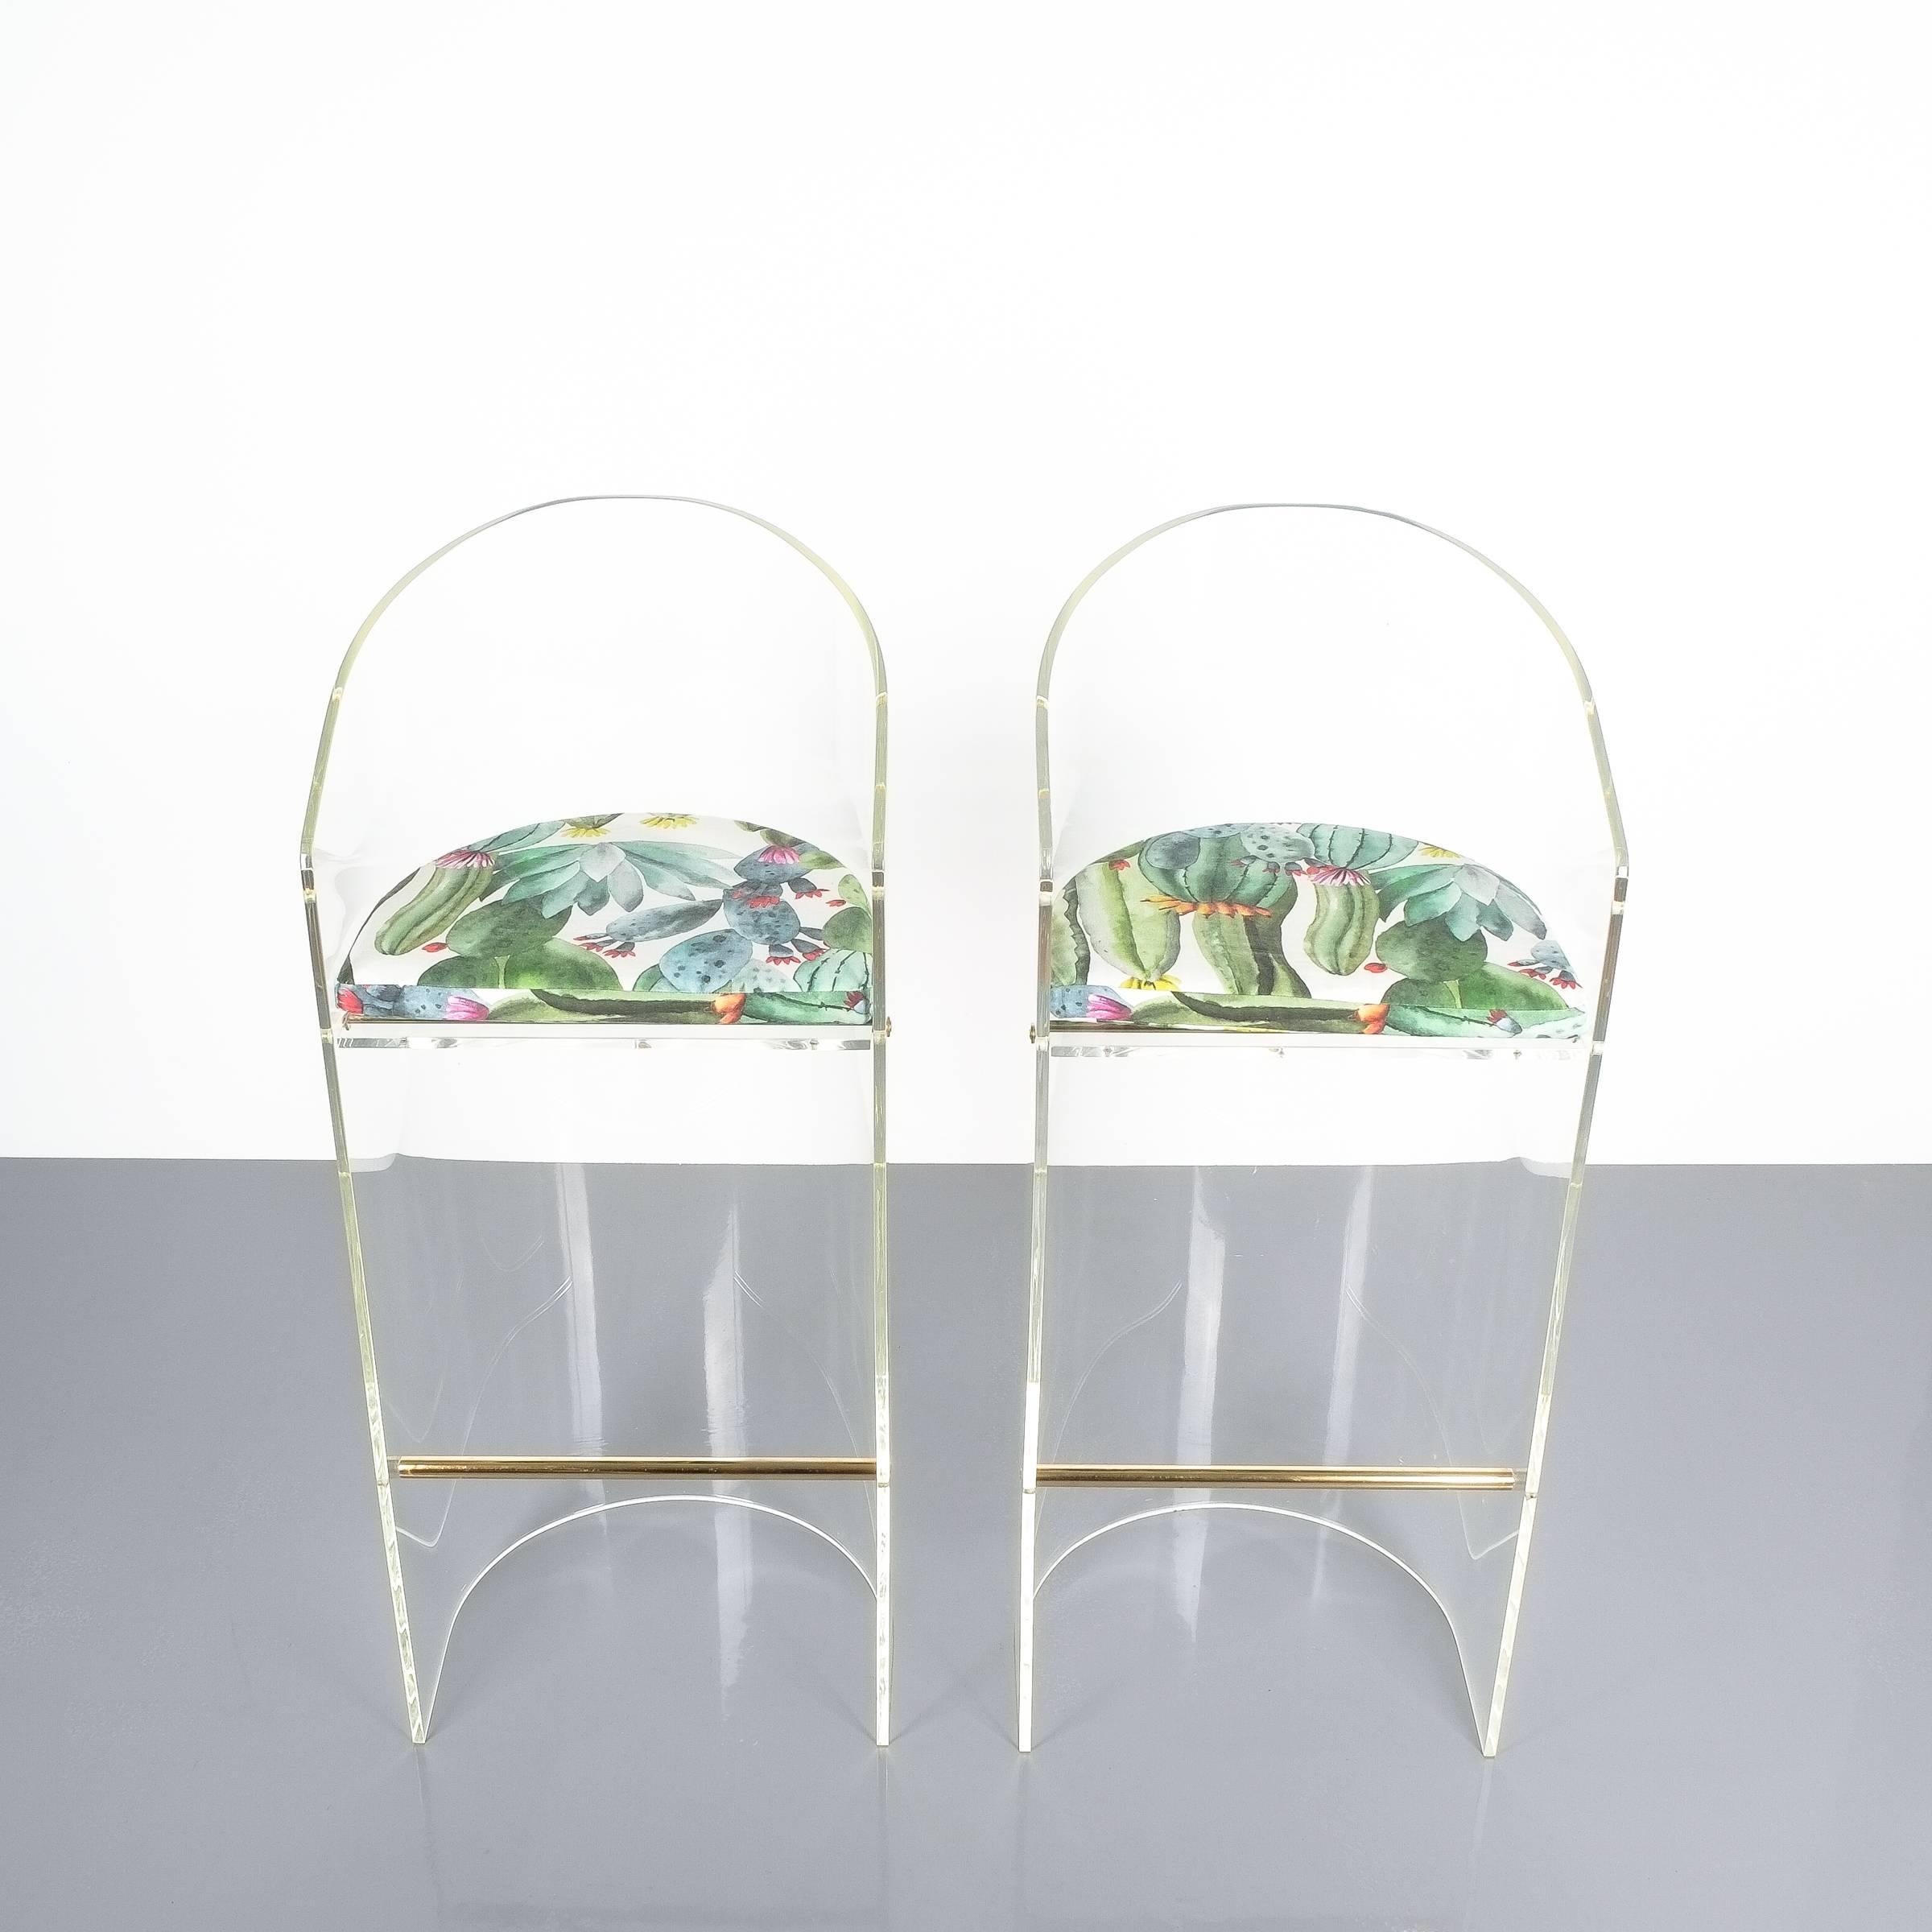 Pair of Lucite brass bar stools Style Charles Hollis Jones, 1960. Beautiful stools made from a single bend slab of perspex and brass details. Perfect for a kitchen. Both have been newly polished (brass and Lucite) and newly upholstered with